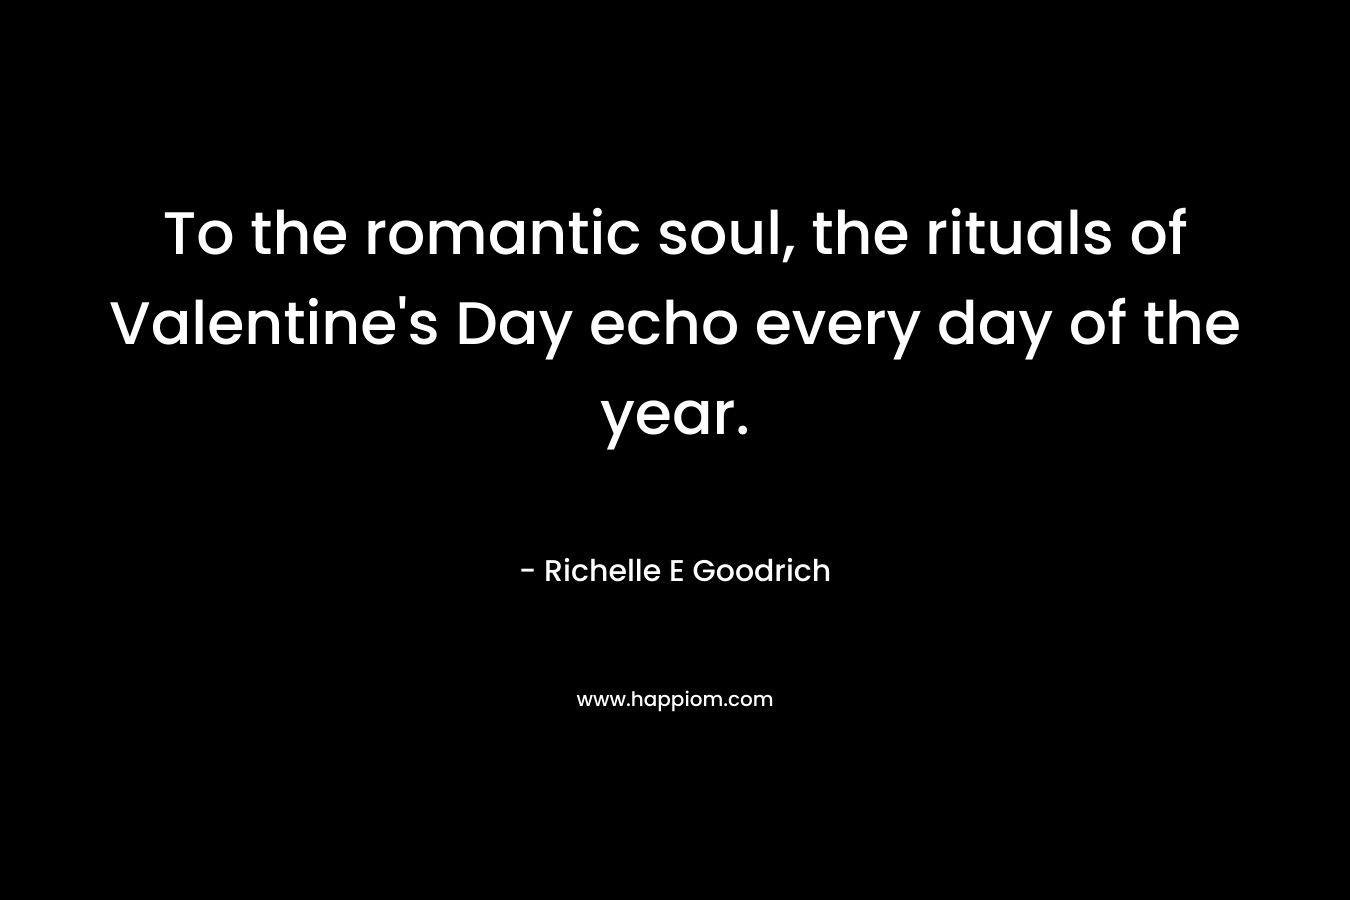 To the romantic soul, the rituals of Valentine’s Day echo every day of the year. – Richelle E Goodrich